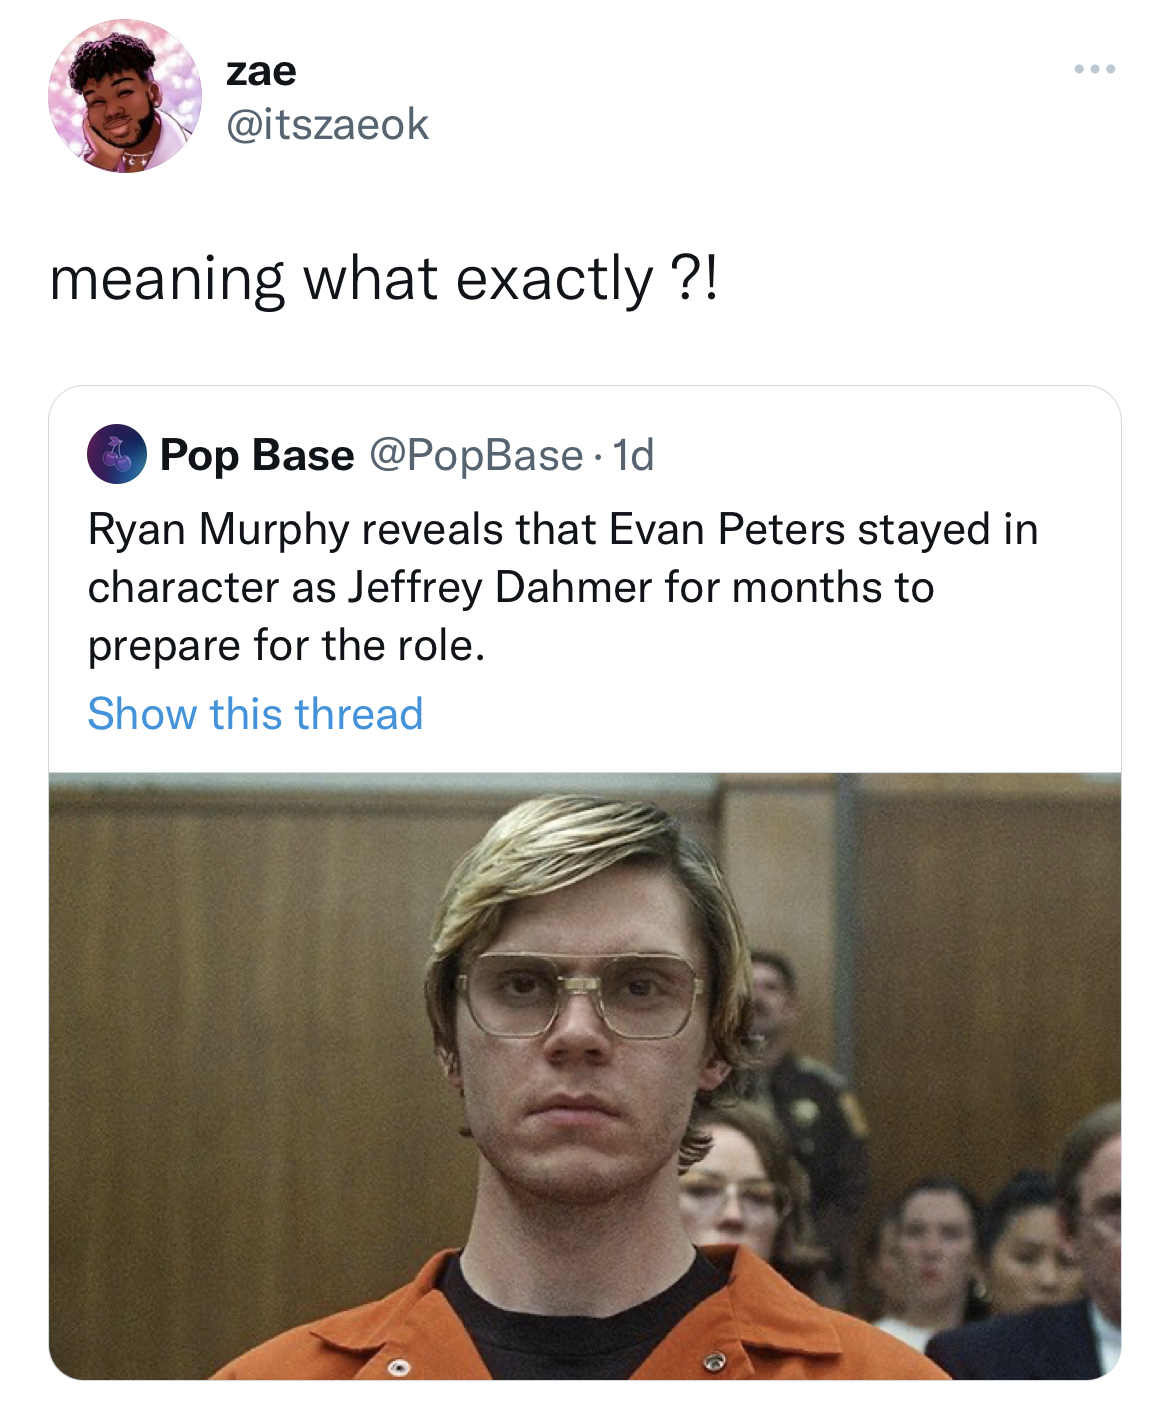 Tweets roasting celebs - evan peters - zae meaning what exactly ?! Pop Base .1d Ryan Murphy reveals that Evan Peters stayed in character as Jeffrey Dahmer for months to prepare for the role. Show this thread